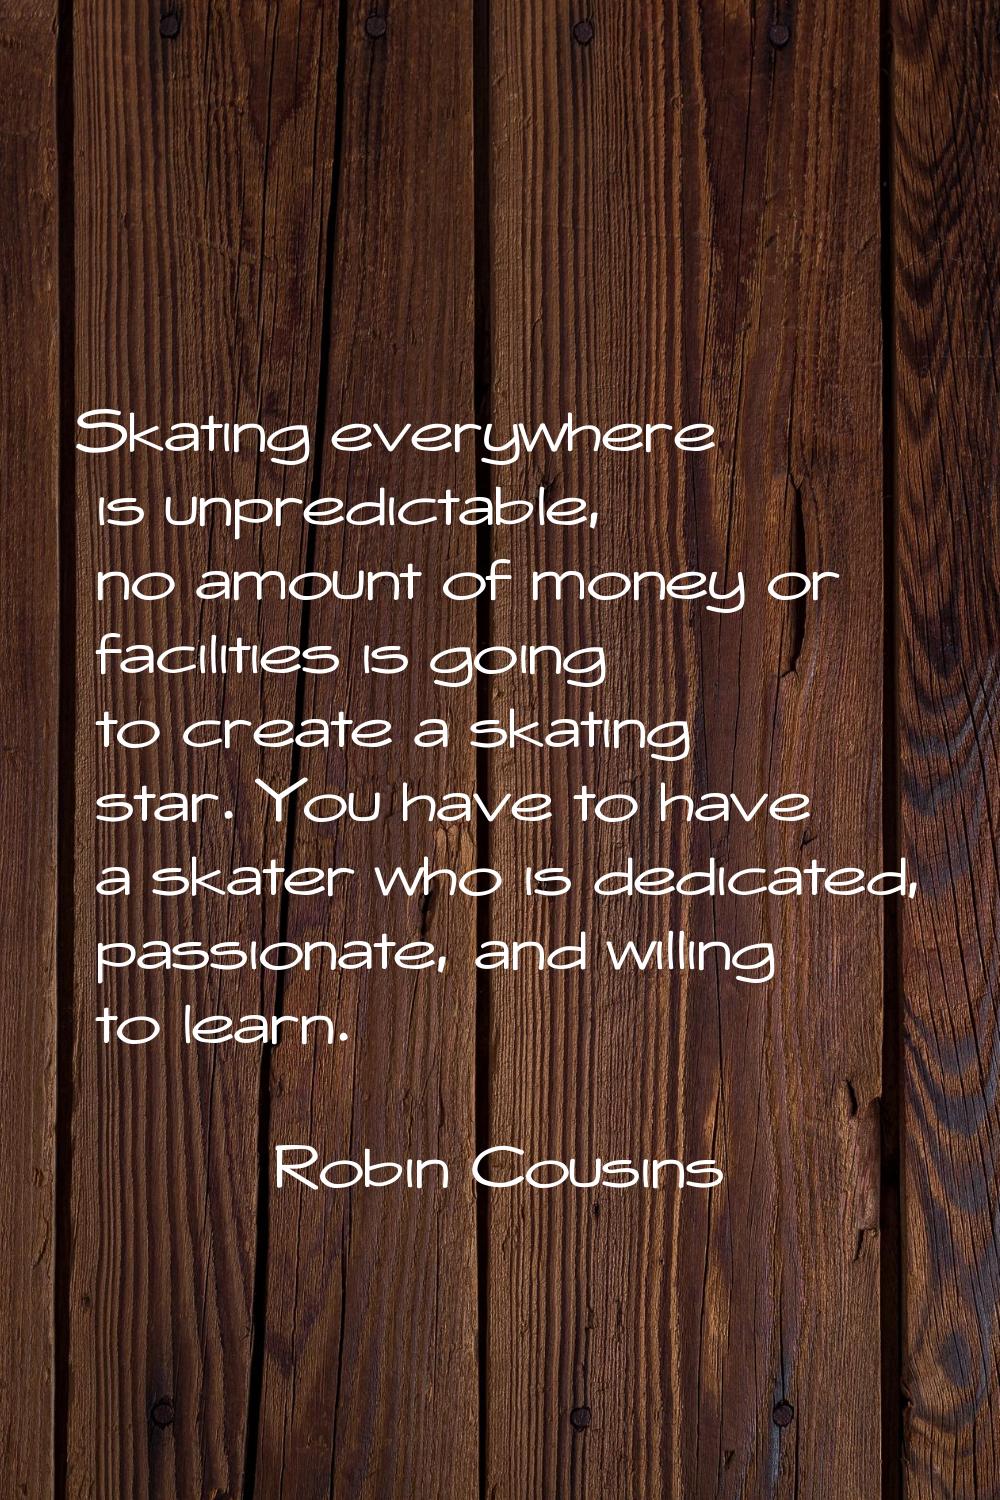 Skating everywhere is unpredictable, no amount of money or facilities is going to create a skating 